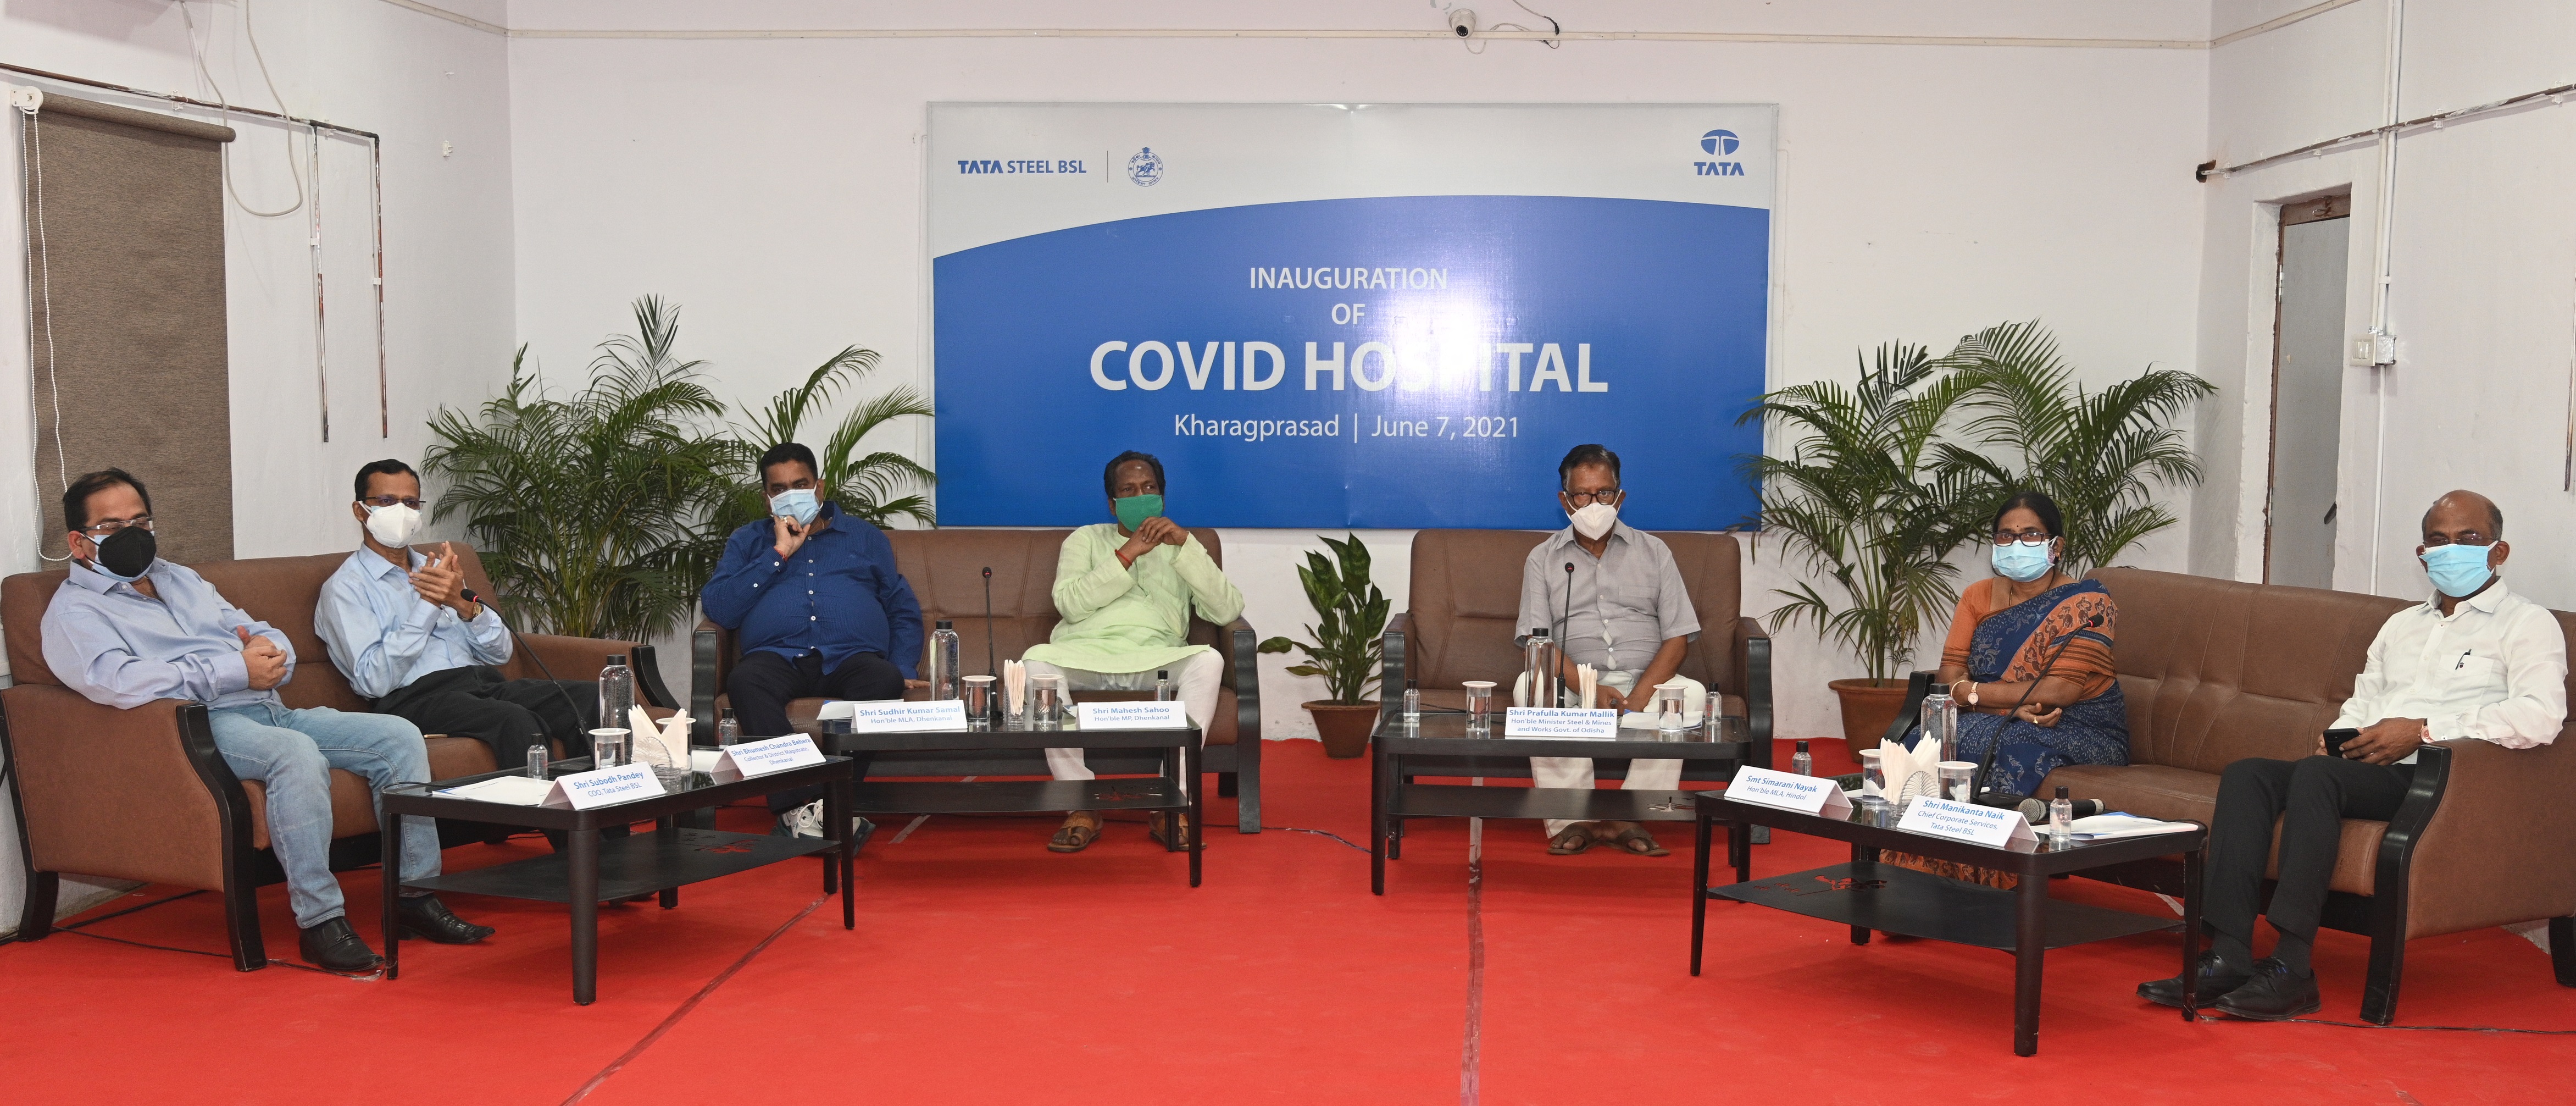 Union Steel Minister inaugurates 100-bed COVID-19 hospital built by Tata Steel BSL in Dhenkanal, Odisha